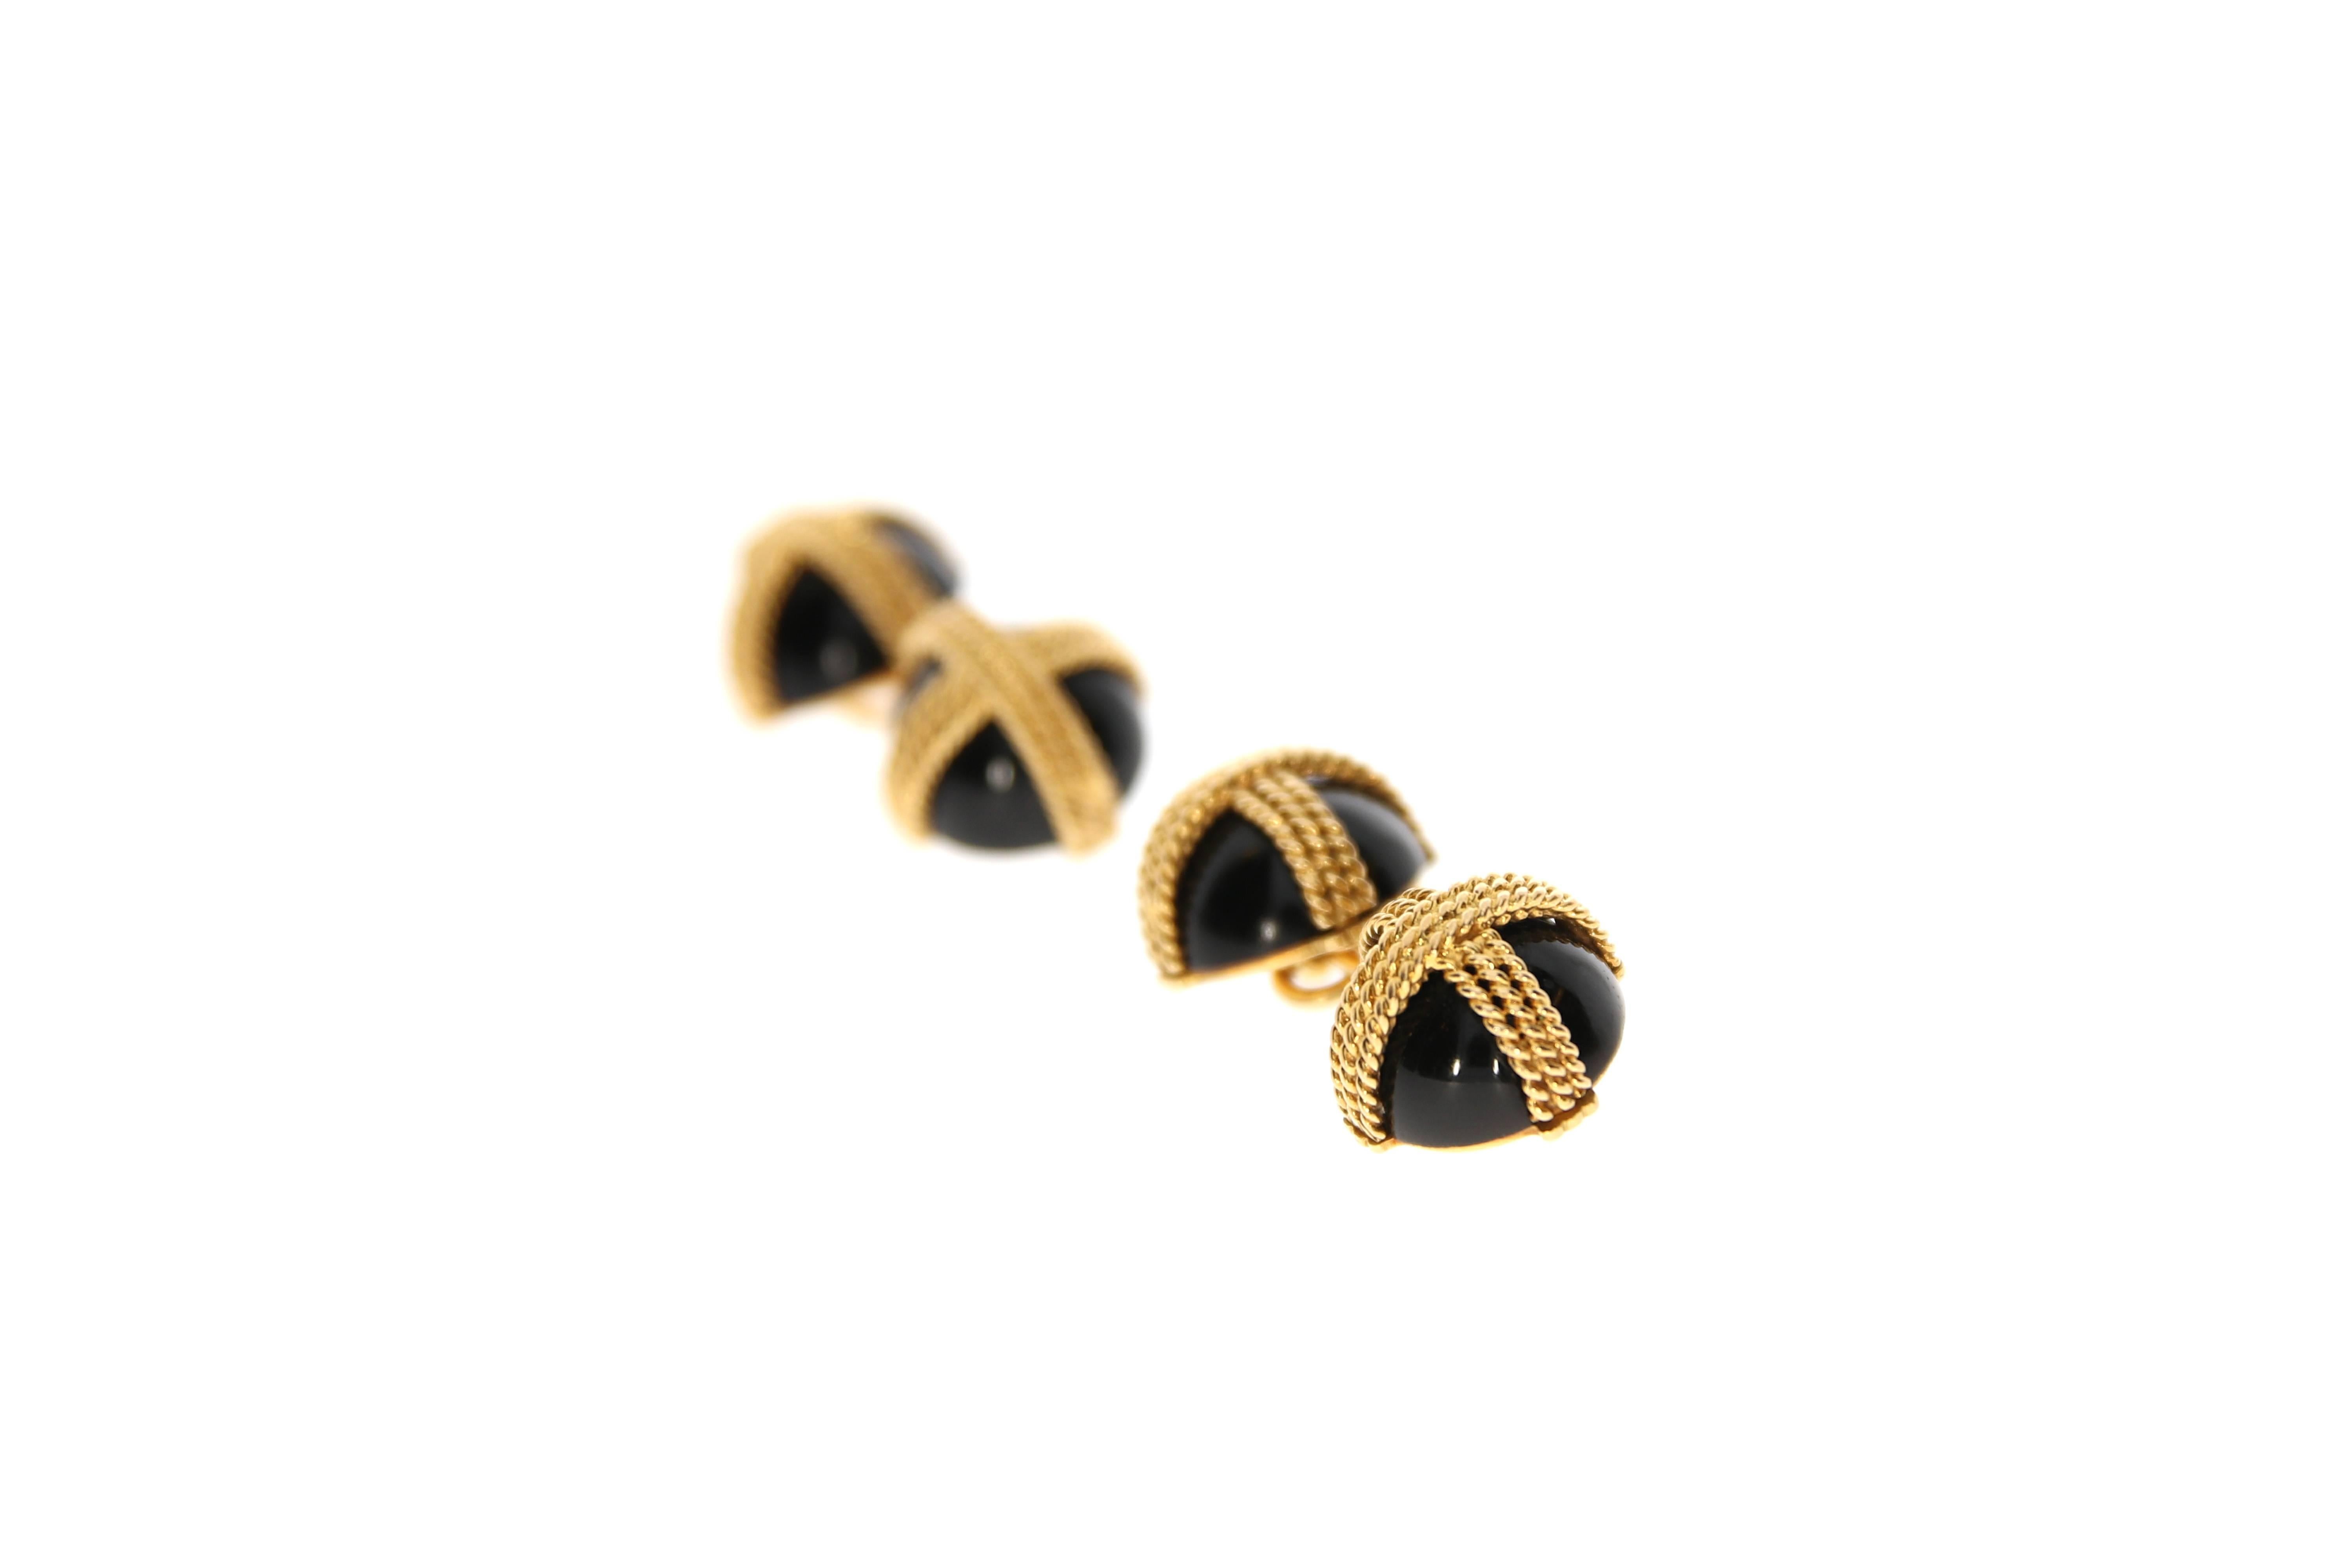 An elegant pair of onyx cufflinks, by Van Cleef and Arpels. Each cabochon onyx terminal is encased within a woven 18 Karat yellow gold cross frame. Signed VCA, numbered #B4083 and French assay marks.